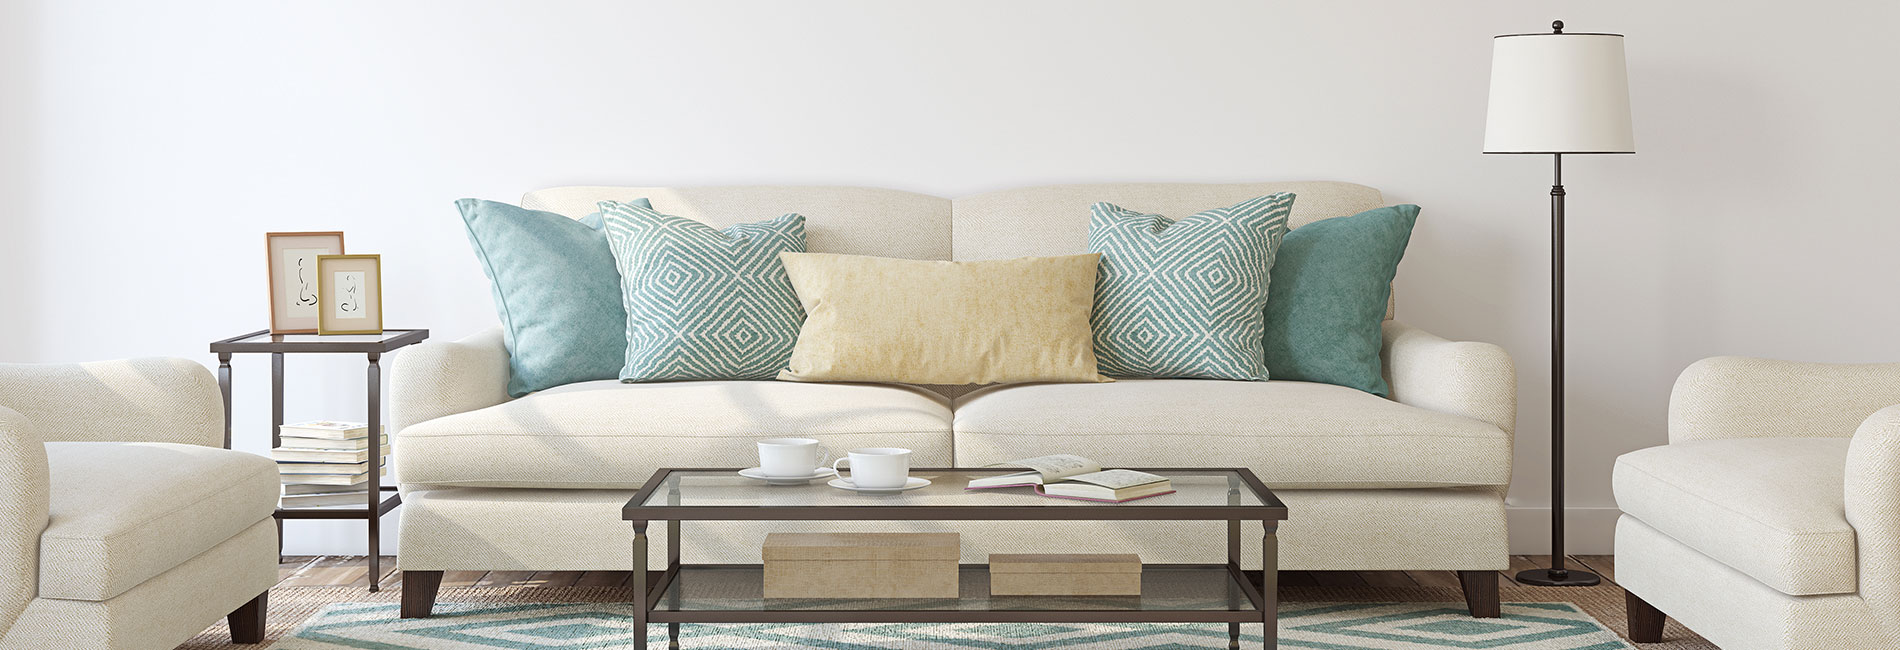 Chic Pastel-colored Sofabed